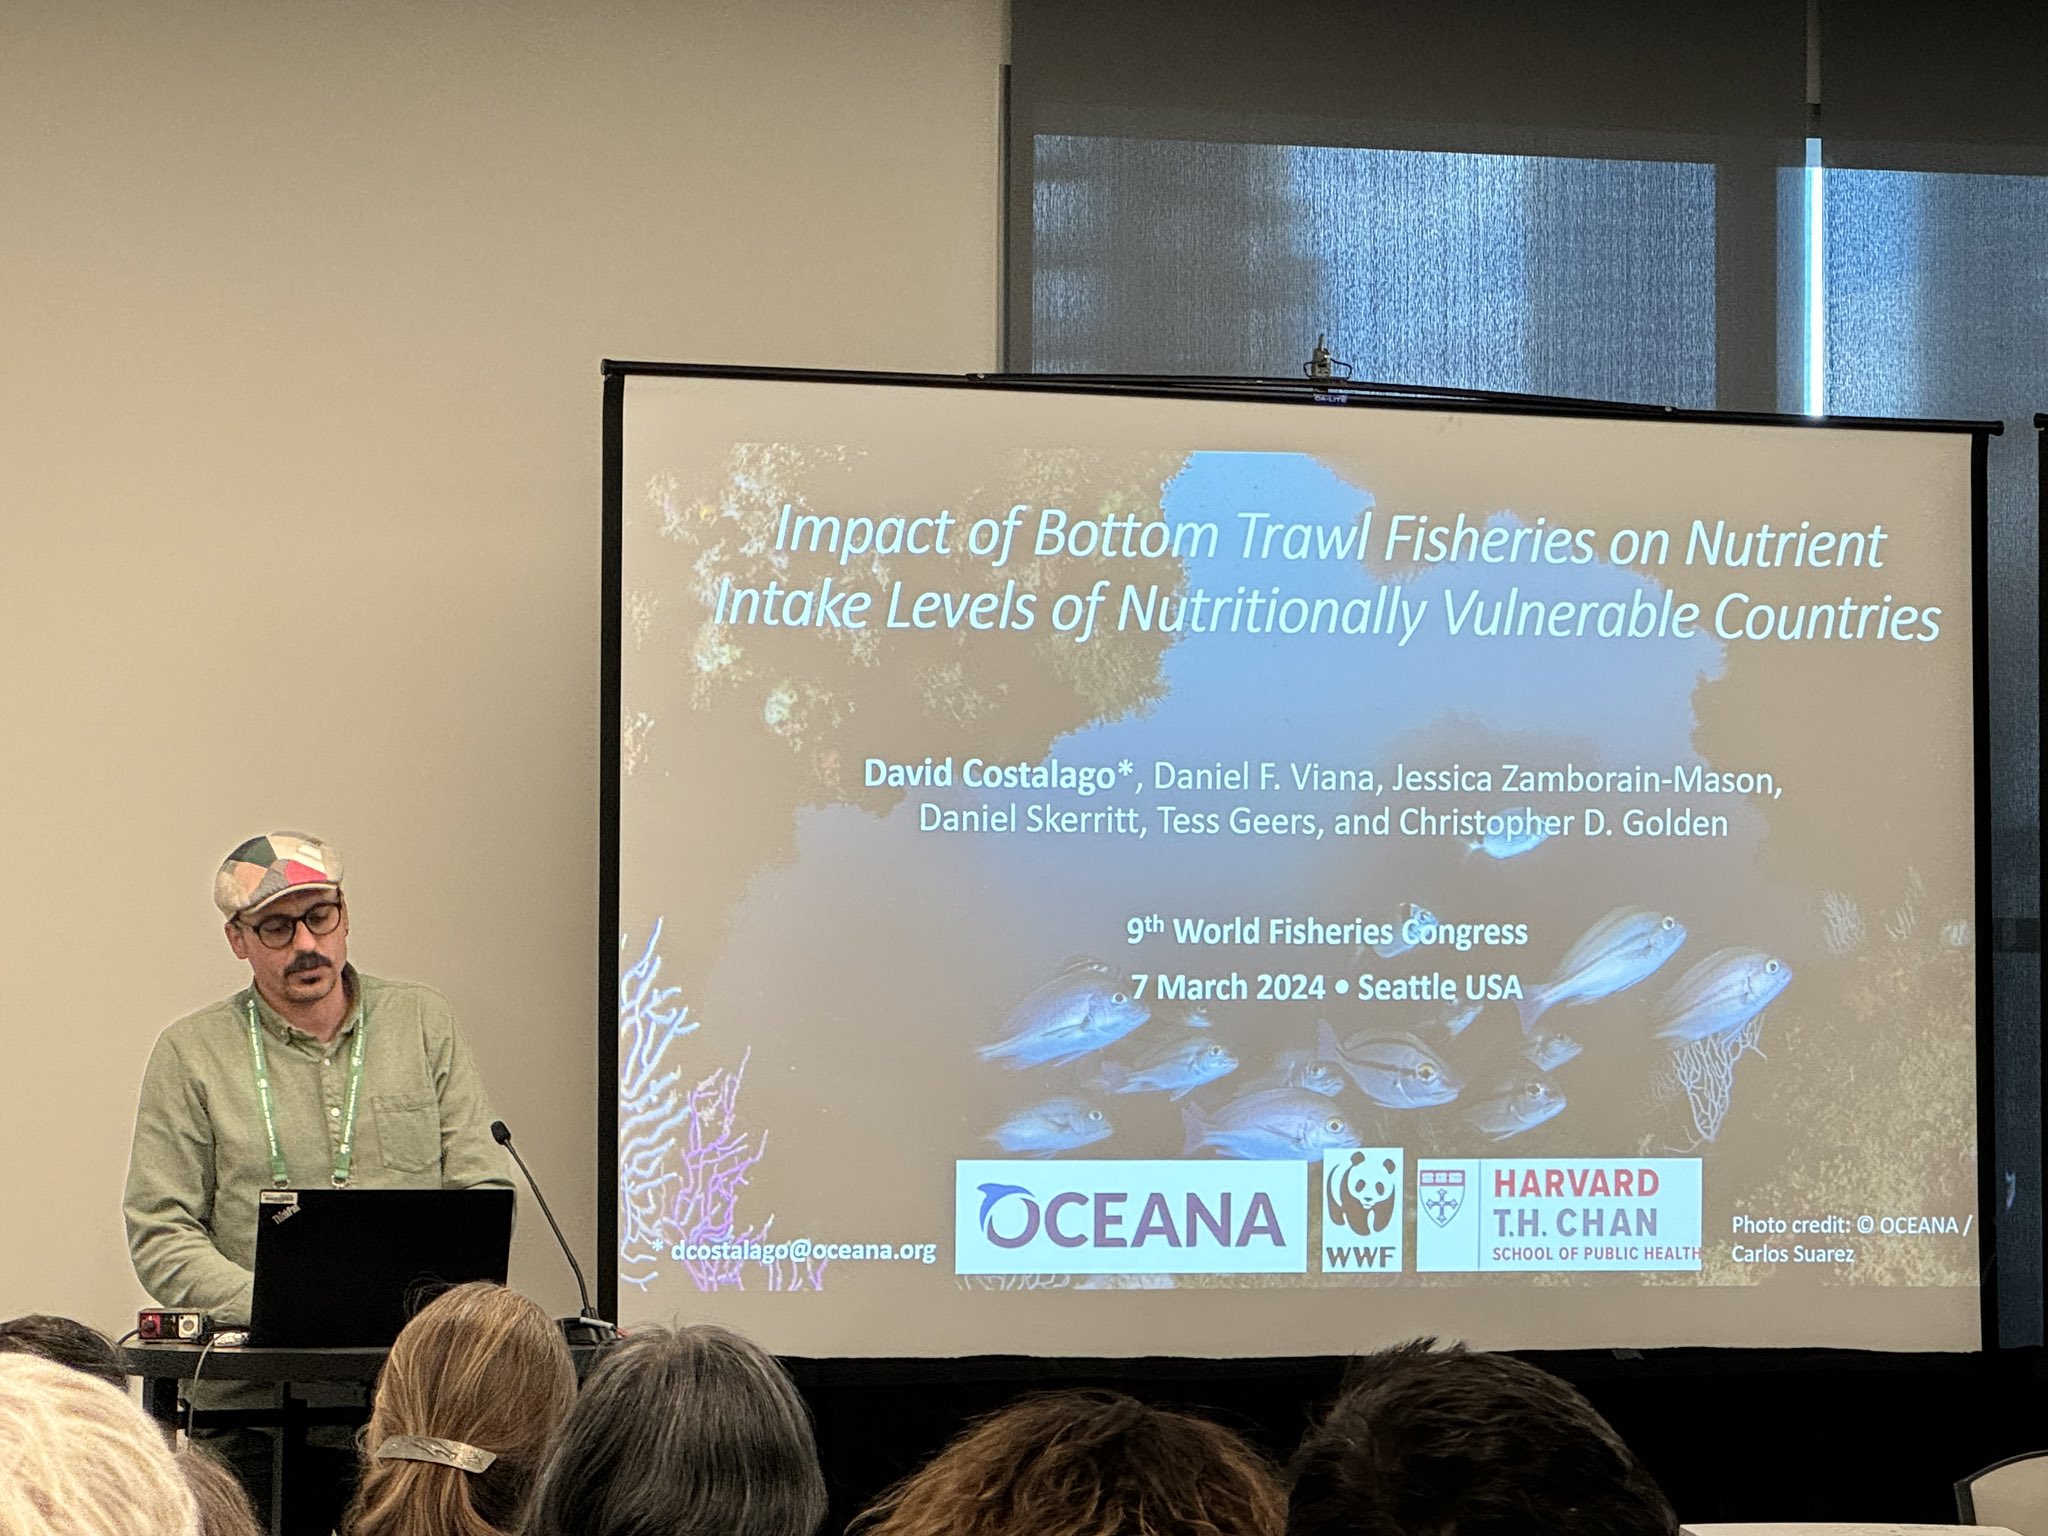 Christopher Golden on X: Great presentation by David Costalago of @oceana  representing our collaboration with @HarvardChanSPH . What could happen if  we ended destructive bottom trawling and instead provided those fish to